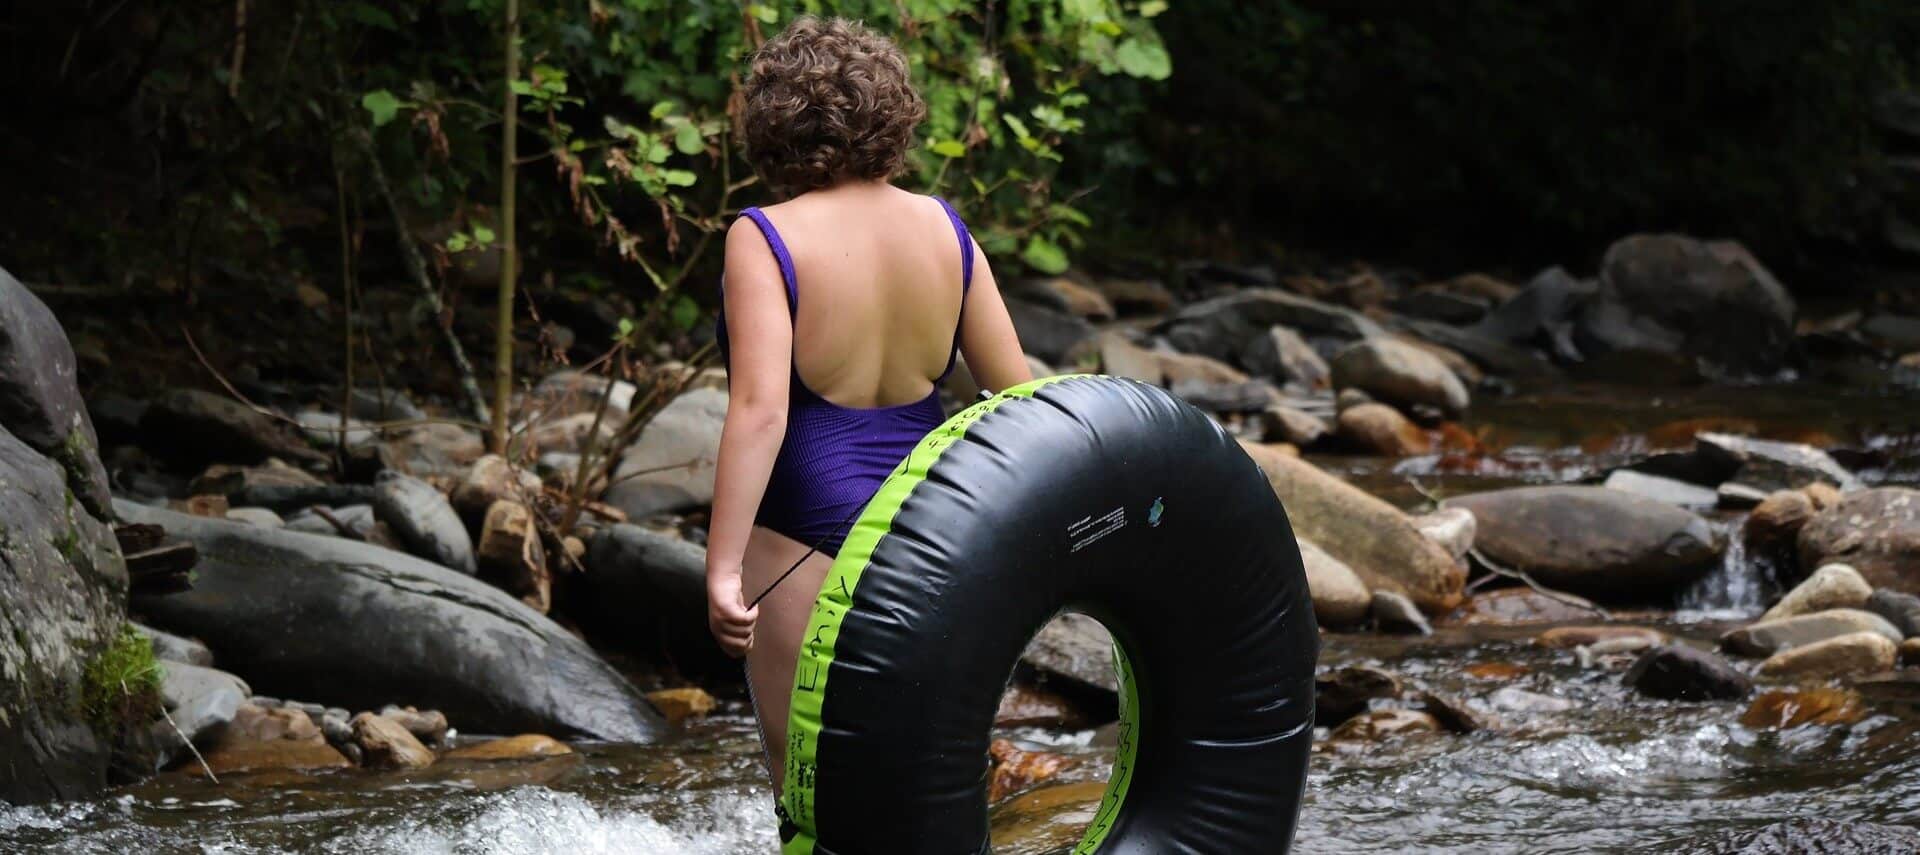 A woman wearing a purple swim suit standing in a river with an inner tube leaning on her.